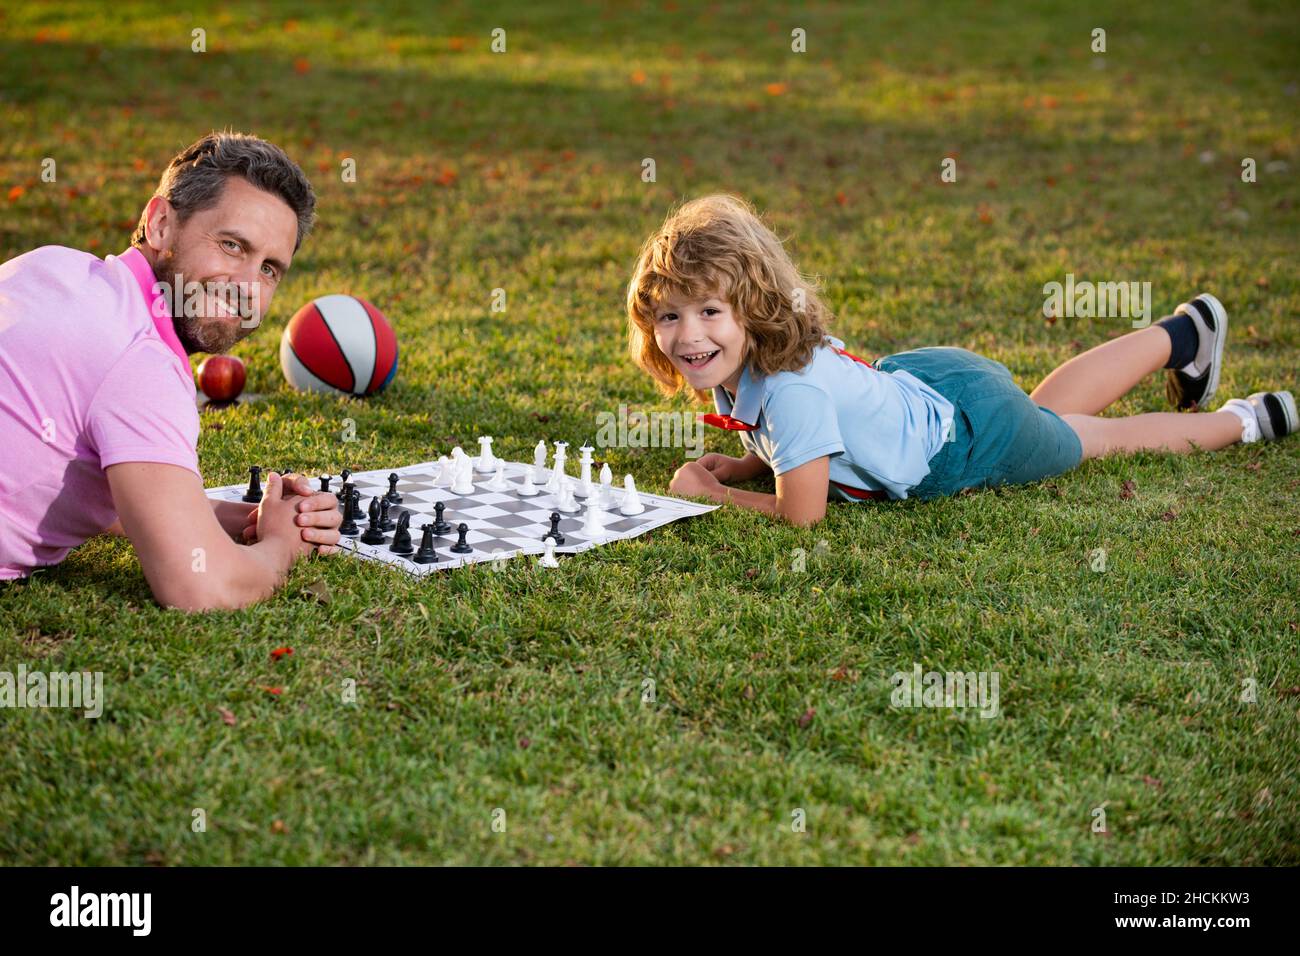 Happy family outdoor. Father and son playing chess in spring garden. Child learning to play chess. Little boy think or plan chess game. Checkmate. Stock Photo